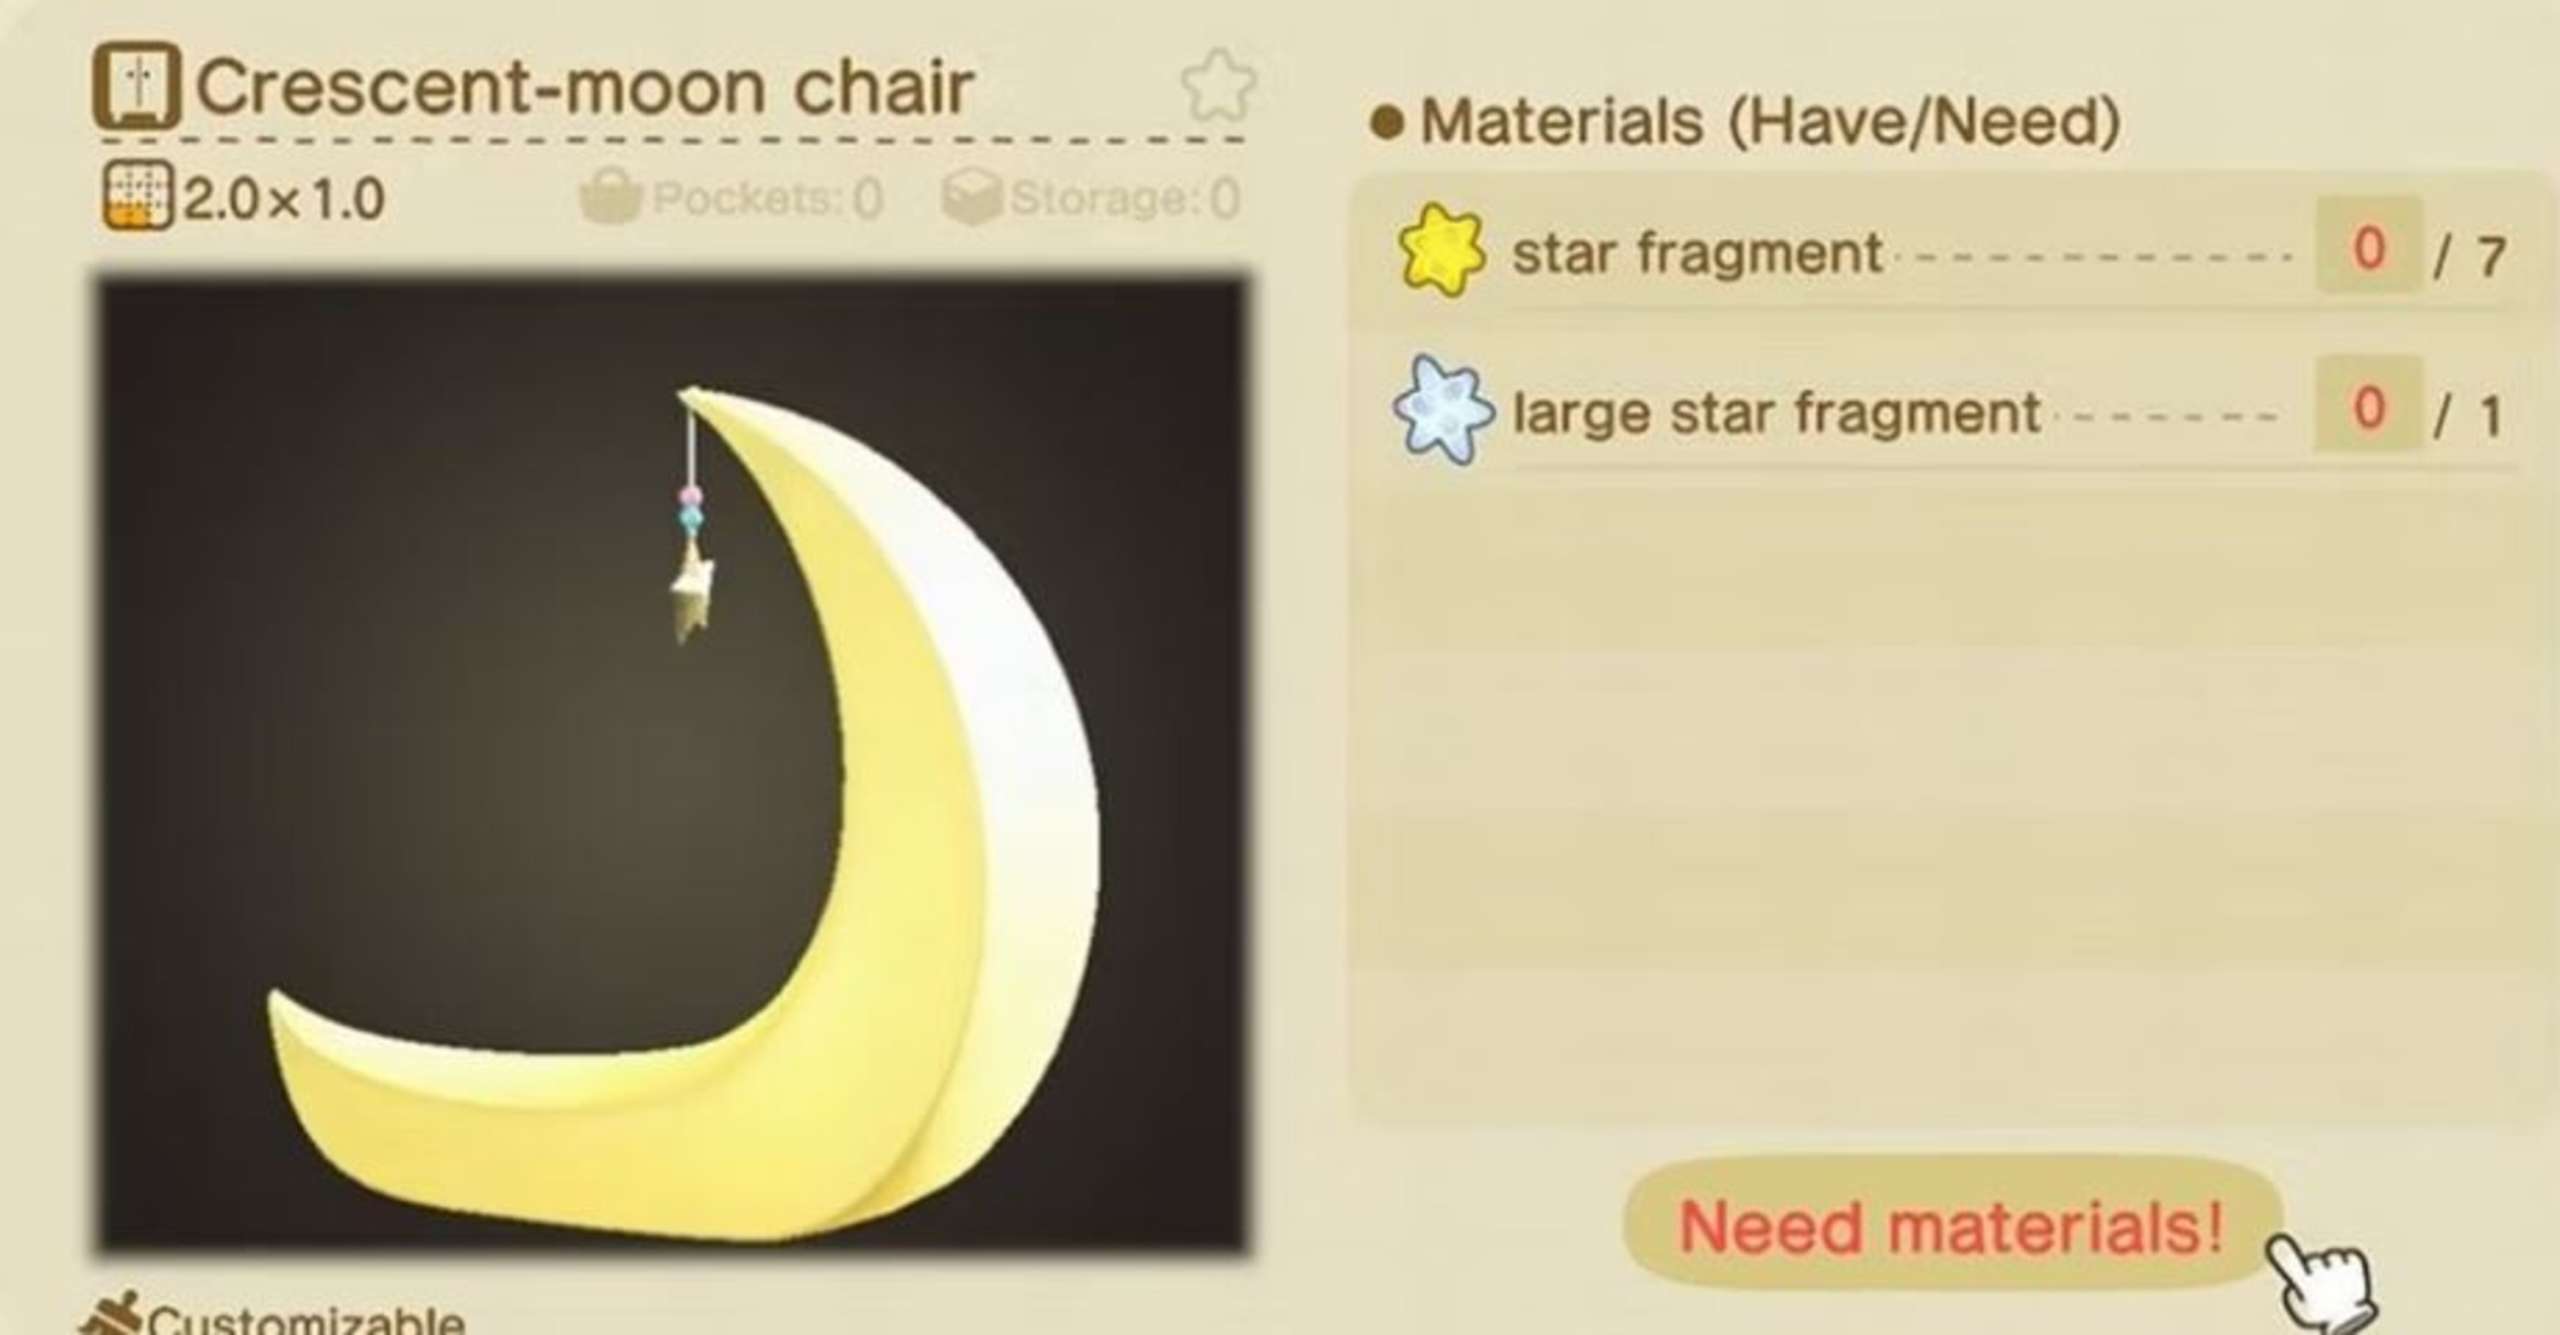 A Fan Of The Life Simulator Animal Crossing: New Horizons 3D-Prints A Phone Stand Modelled By The Game’s Crescent Moon Chair